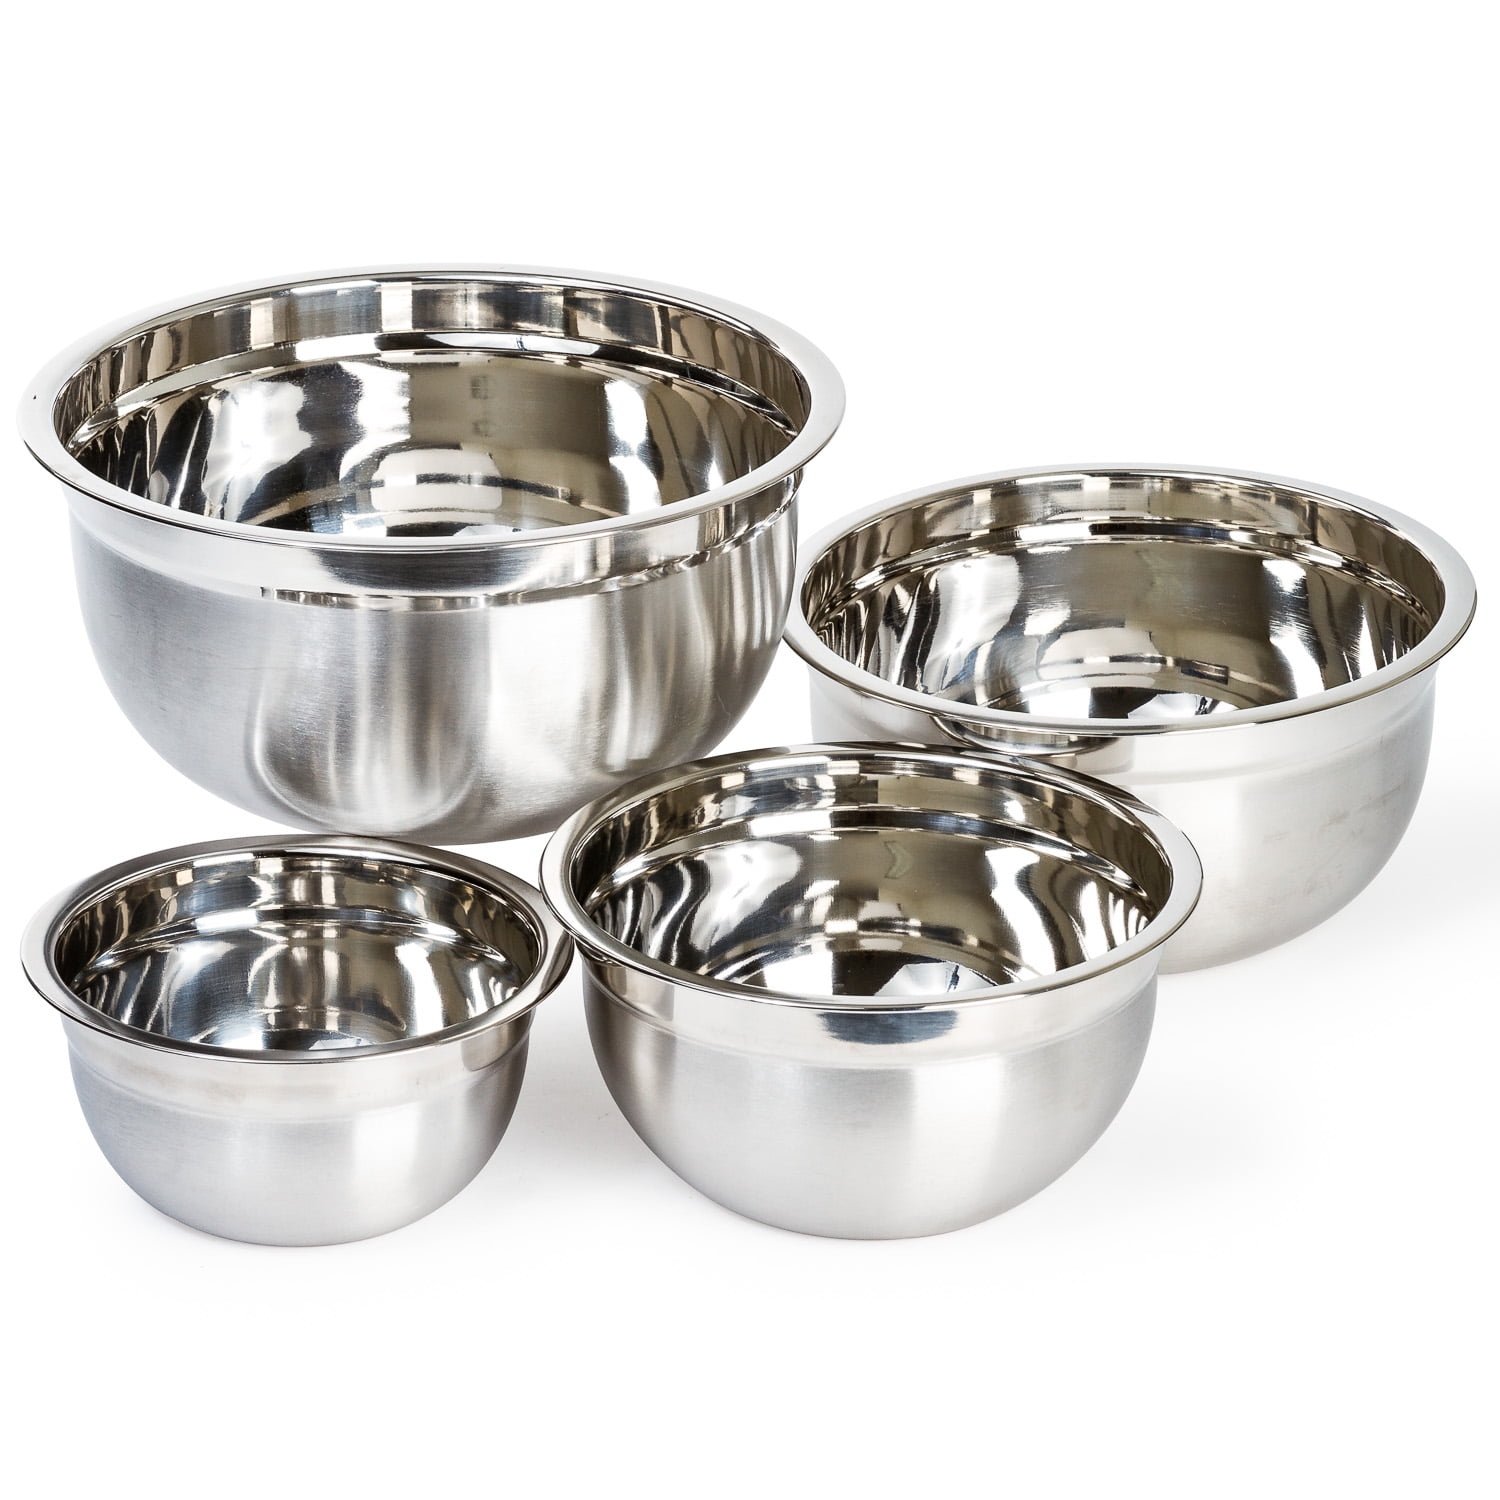 Heavy Duty Stainless Steel Mixing Bowls